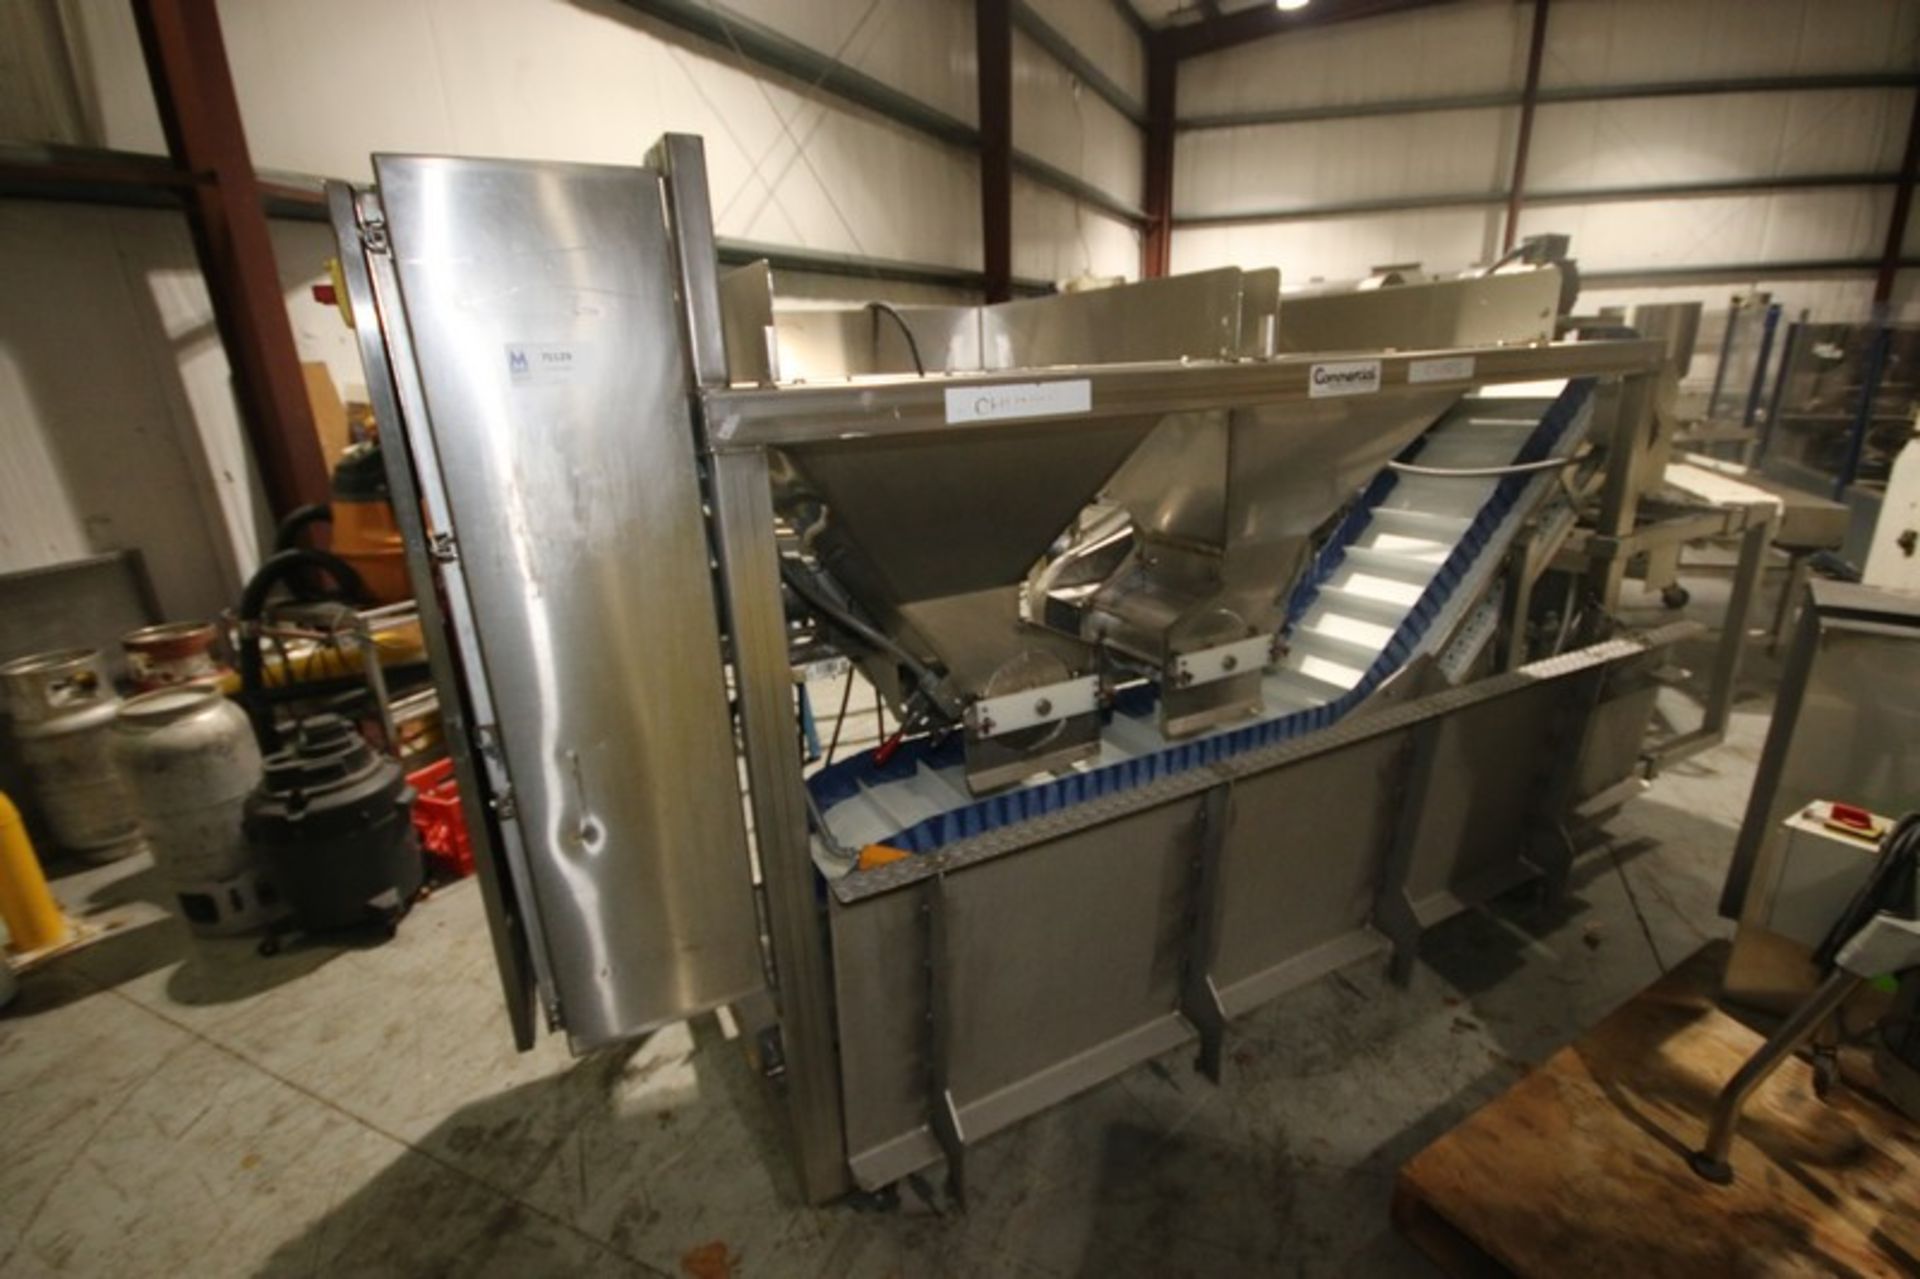 Commercial S/S Chips/Chunk Feeder Conveyor, S/N MU120310604, Job No.: 10604, with Flighted Conveyor, - Image 4 of 16